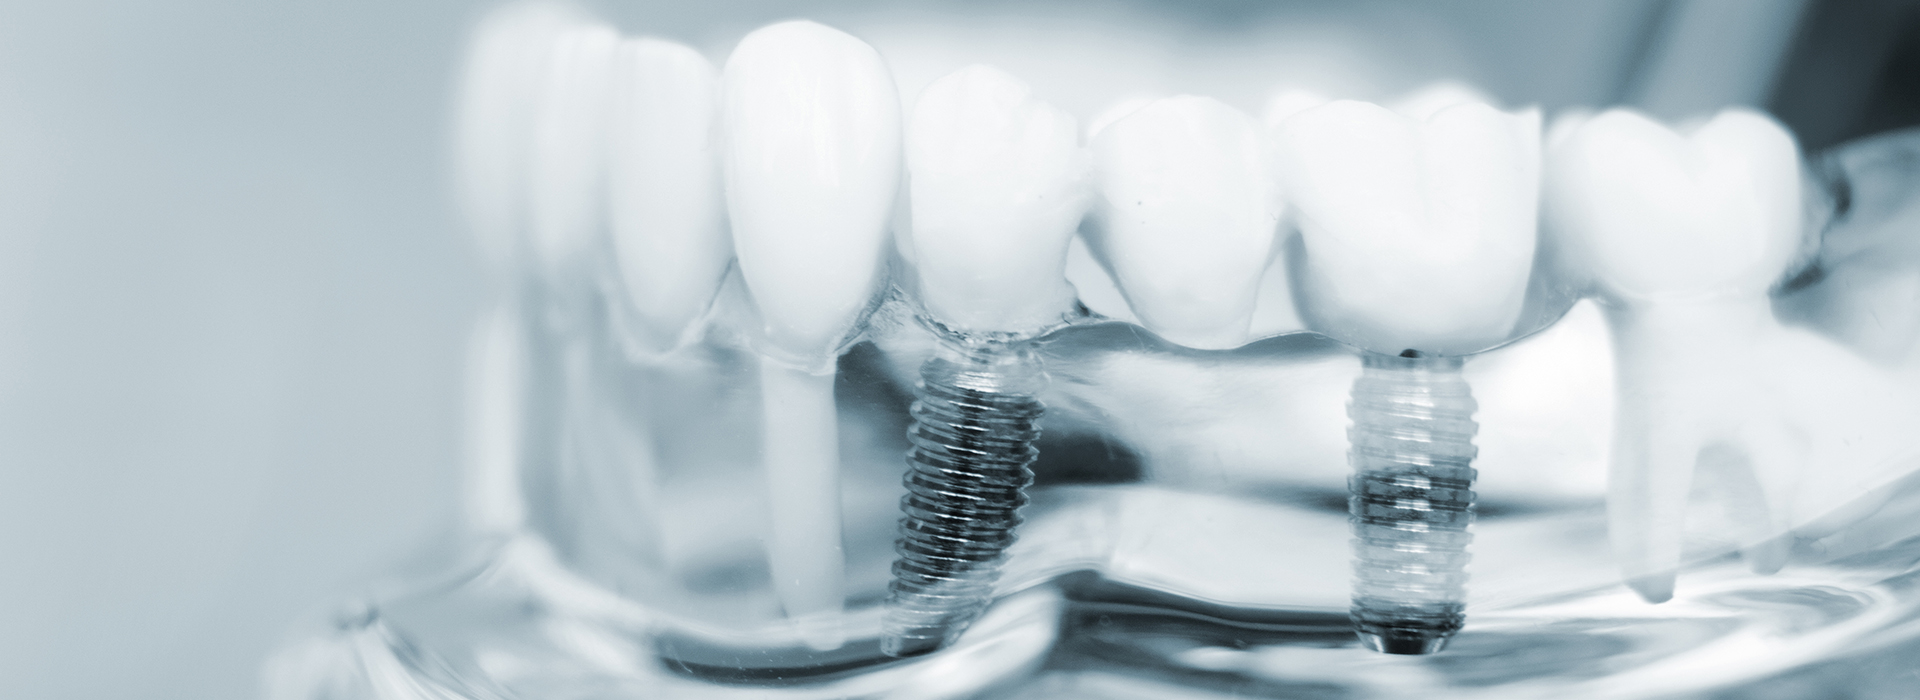 iSmile Dental | Digital Impressions, Root Canals and Oral Exams